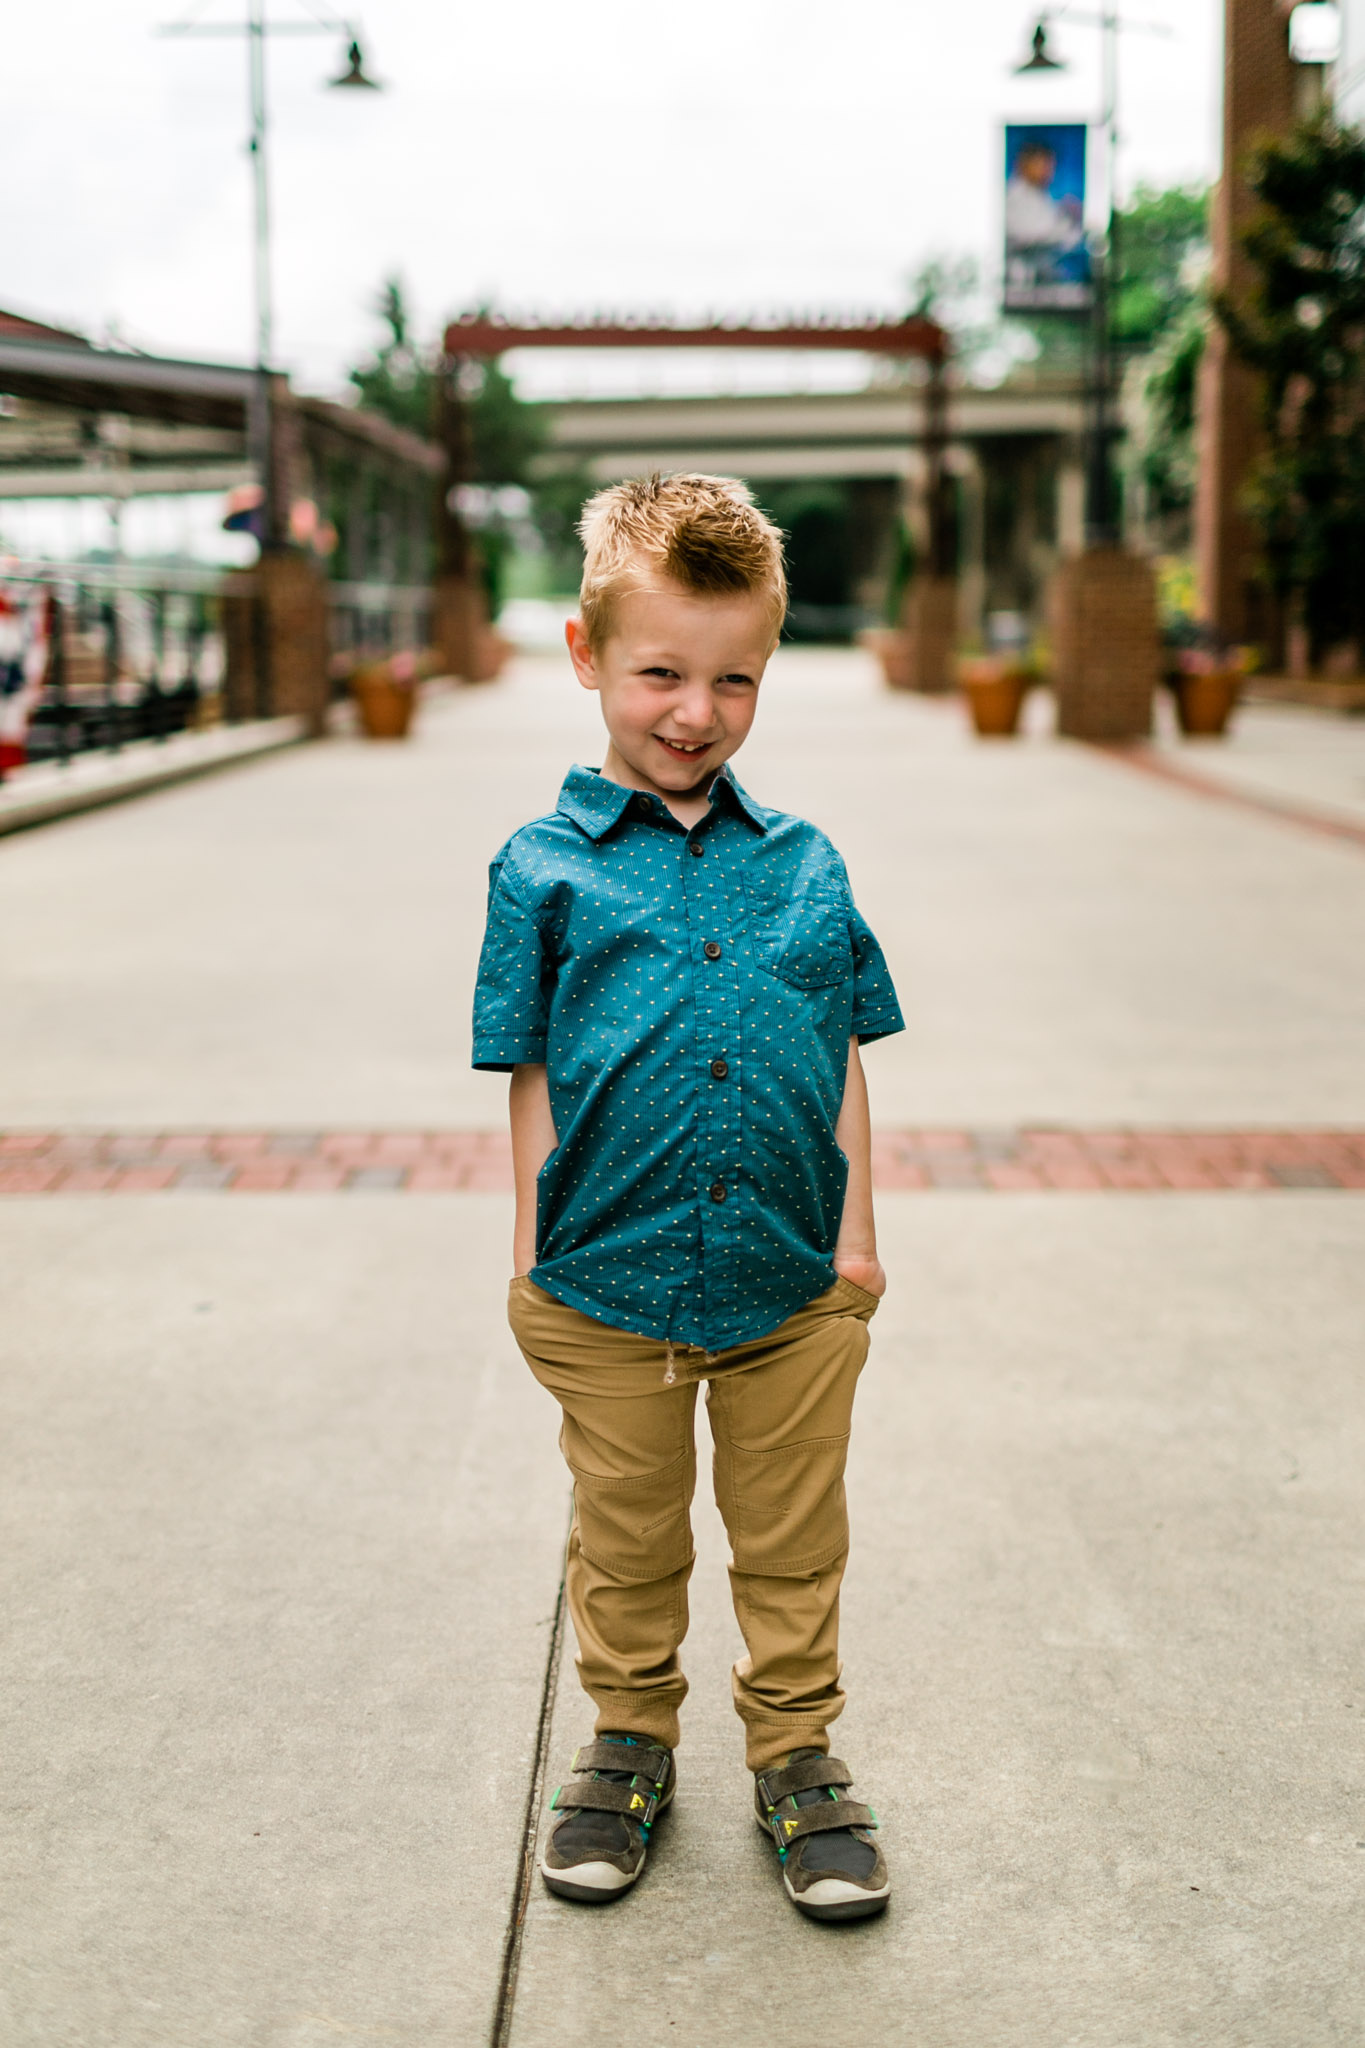 Durham Family Photographer | By G. Lin Photography | Portrait of young boy smiling at camera